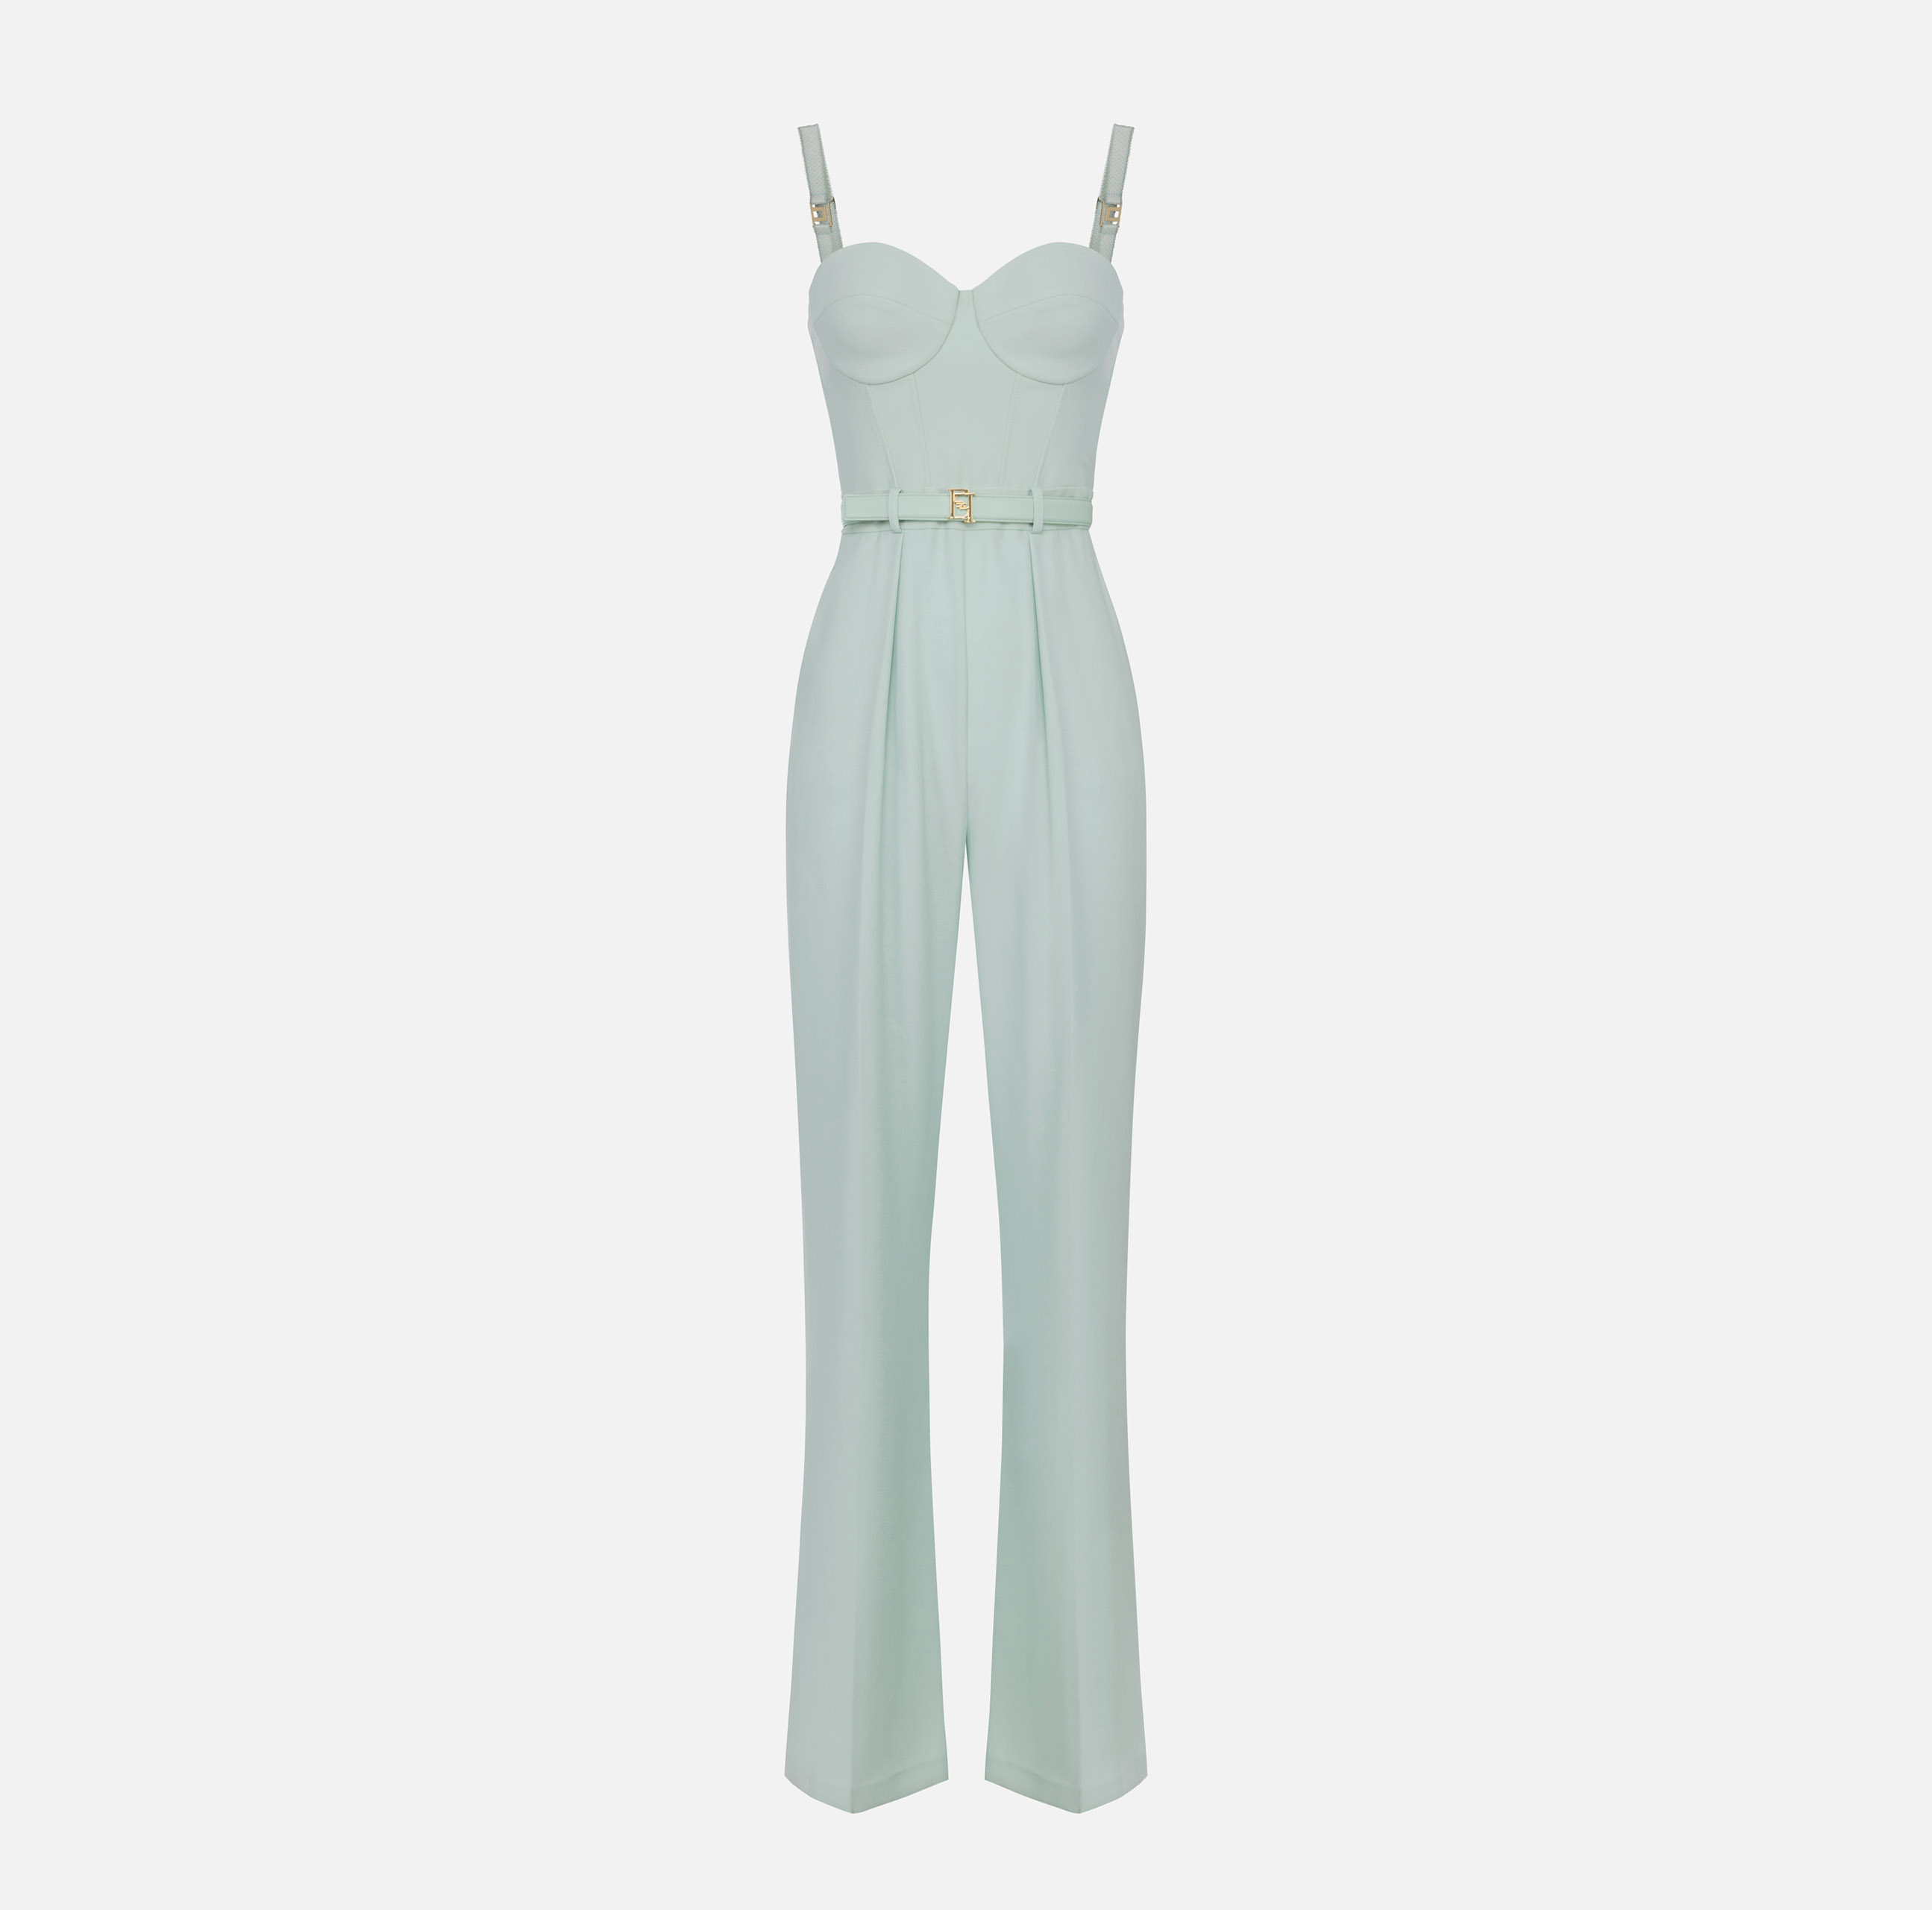 Jumpsuit in crêpe fabric with bustier top | Elisabetta Franchi